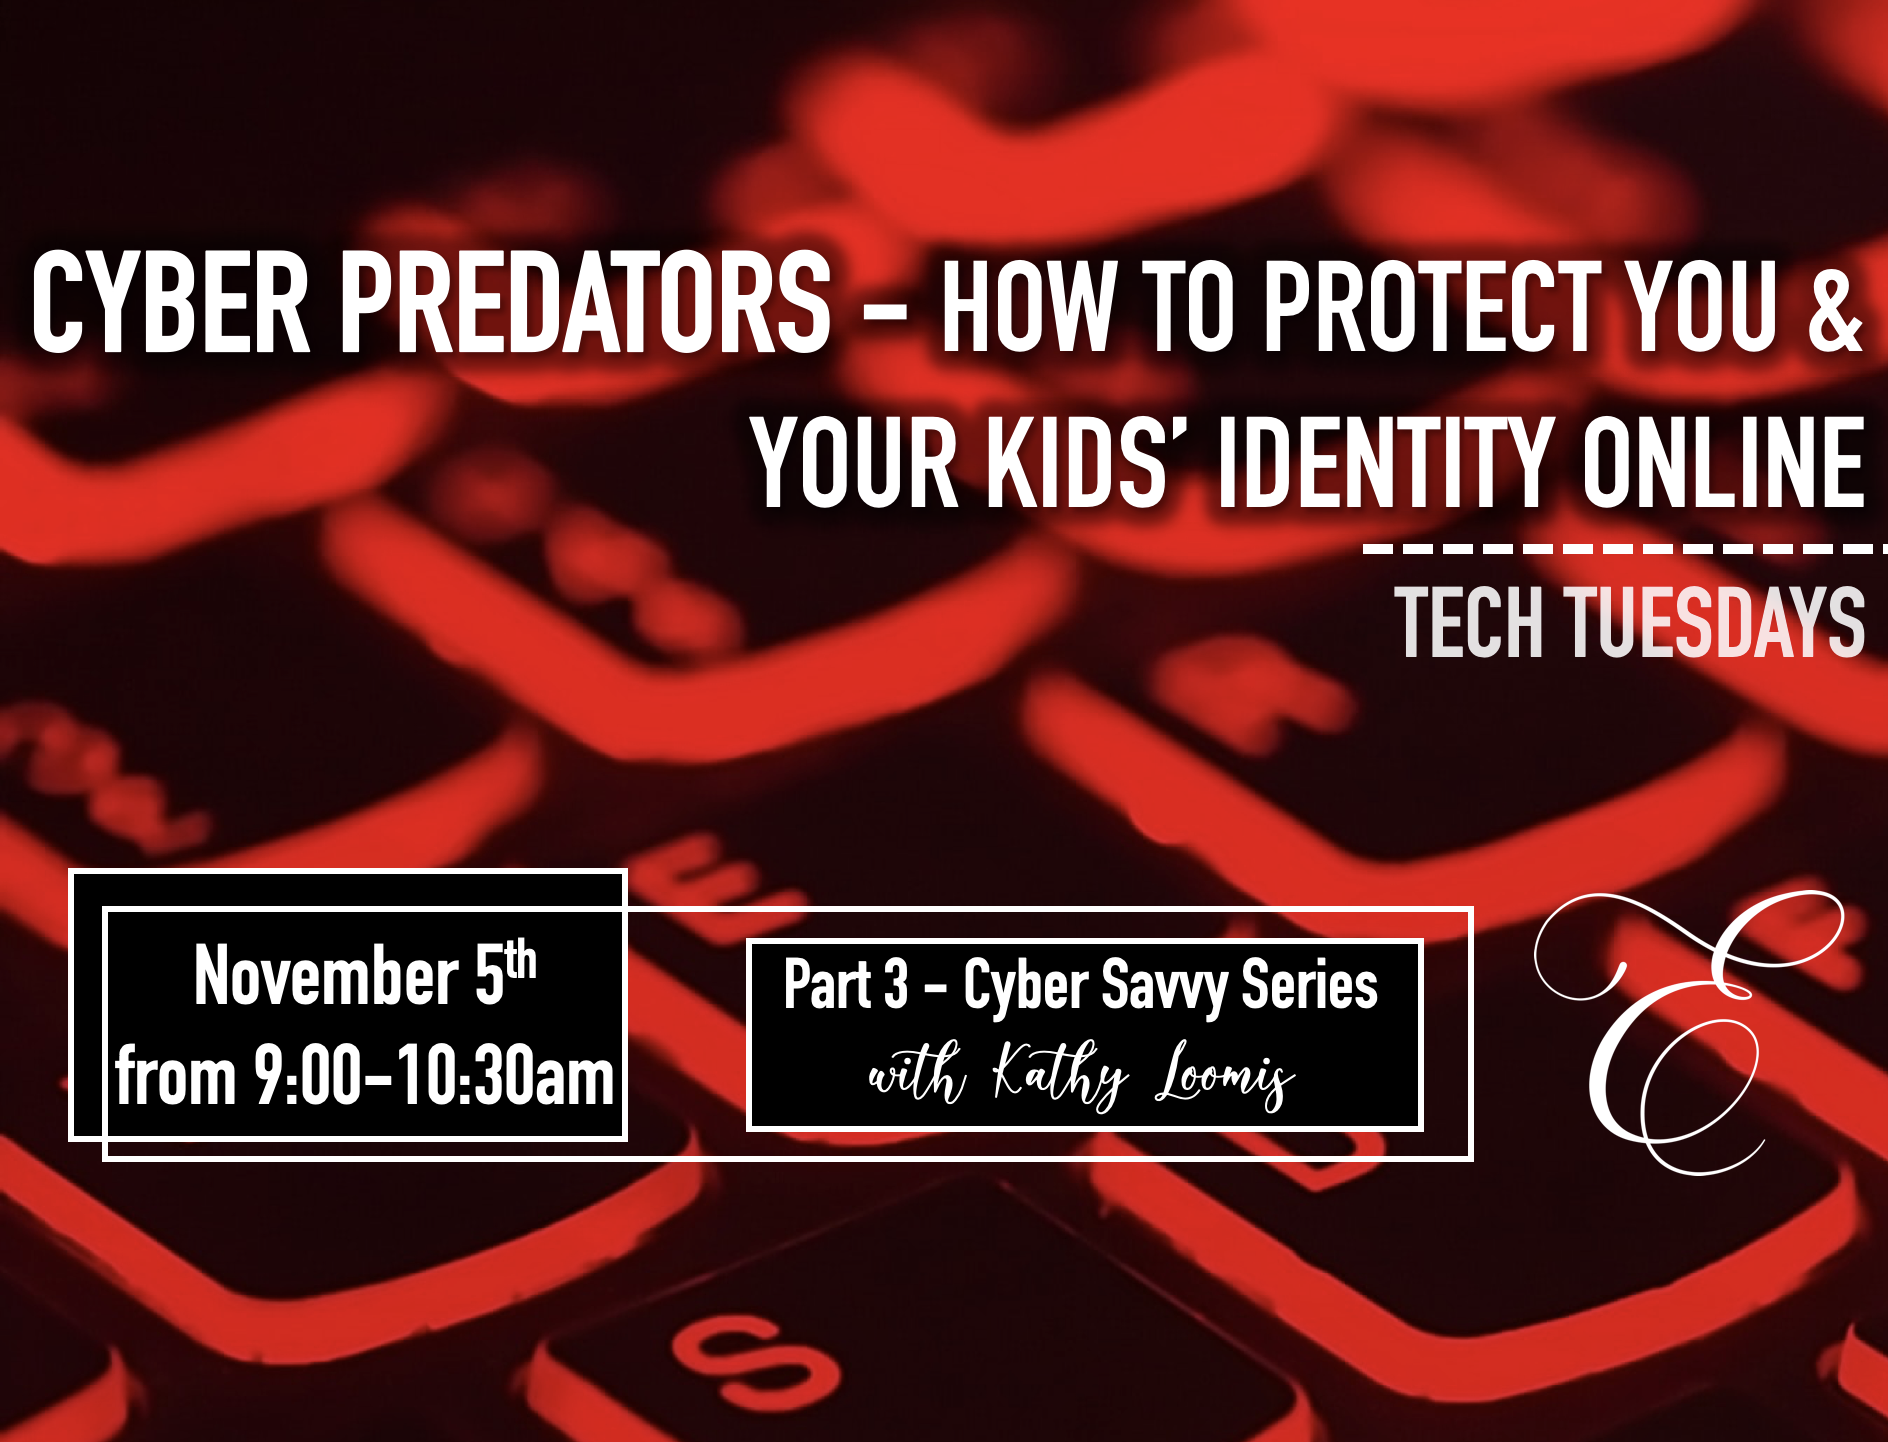 Cyber Savvy Part 3: Cyber Predators - How to Protect You & Your Kids' Identity Online